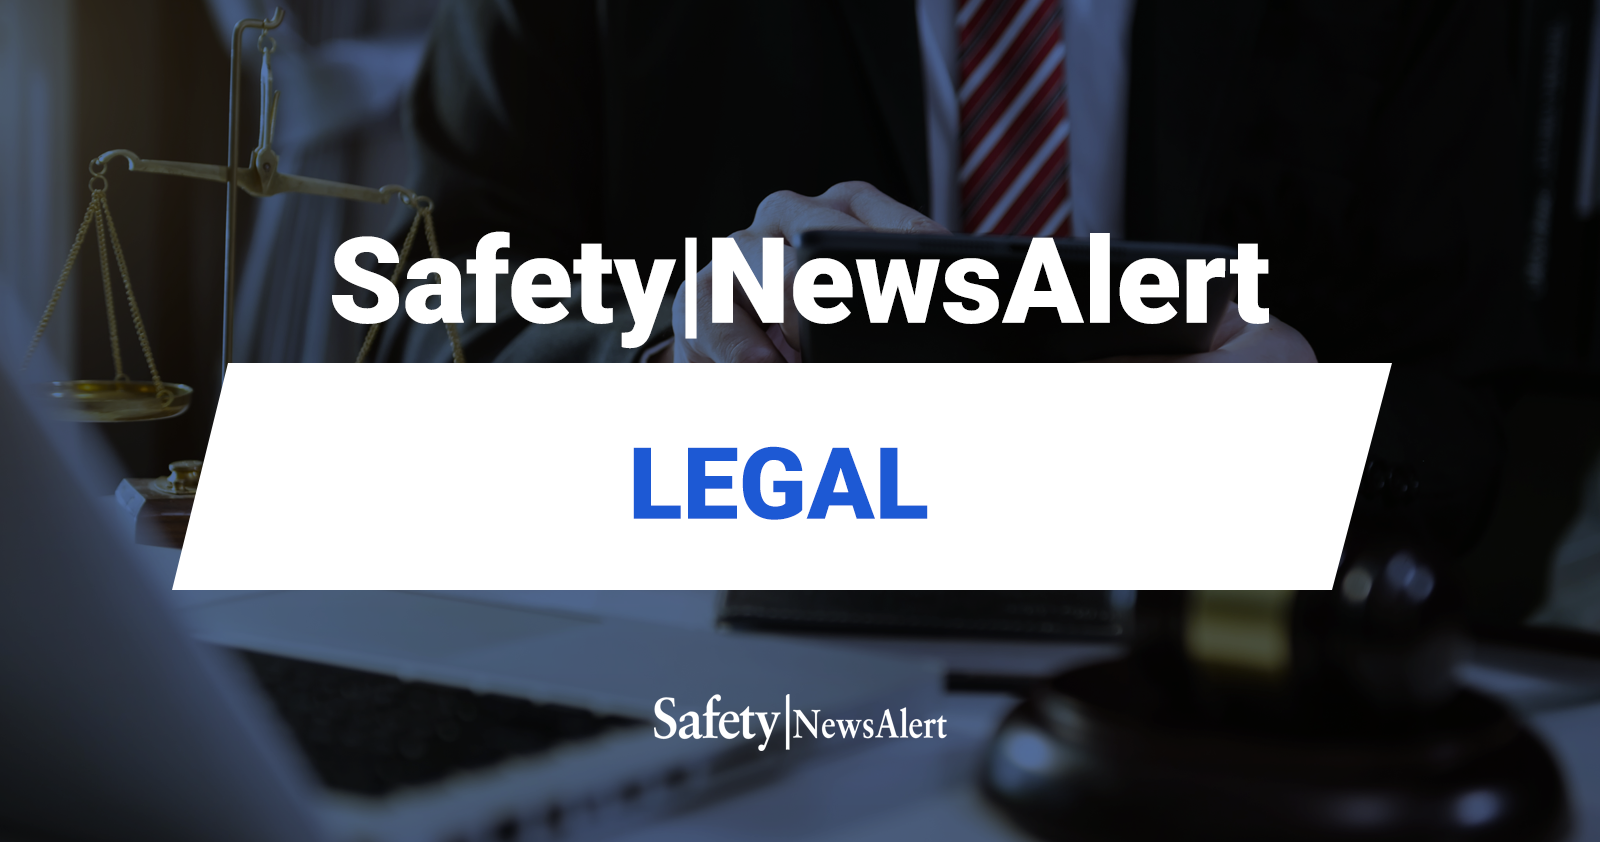 Plant owners charged in 1.7M comp scheme Safety News Alert